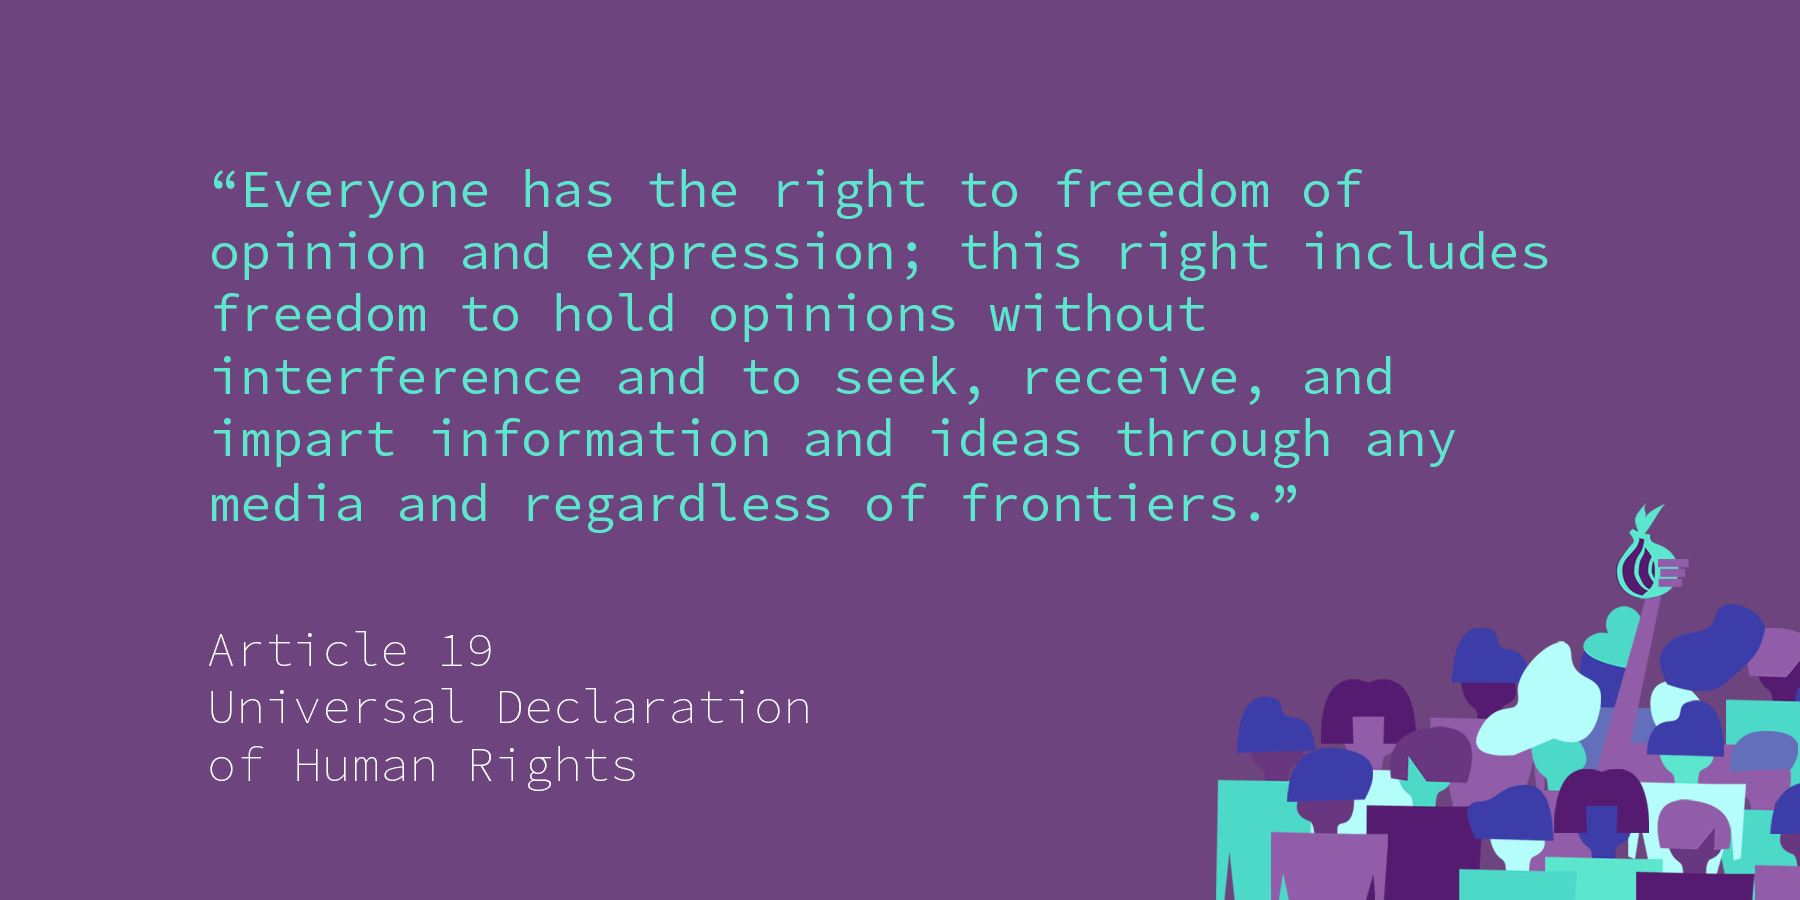 Universal Declaration of Human Rights - Article 19 - The Tor Project